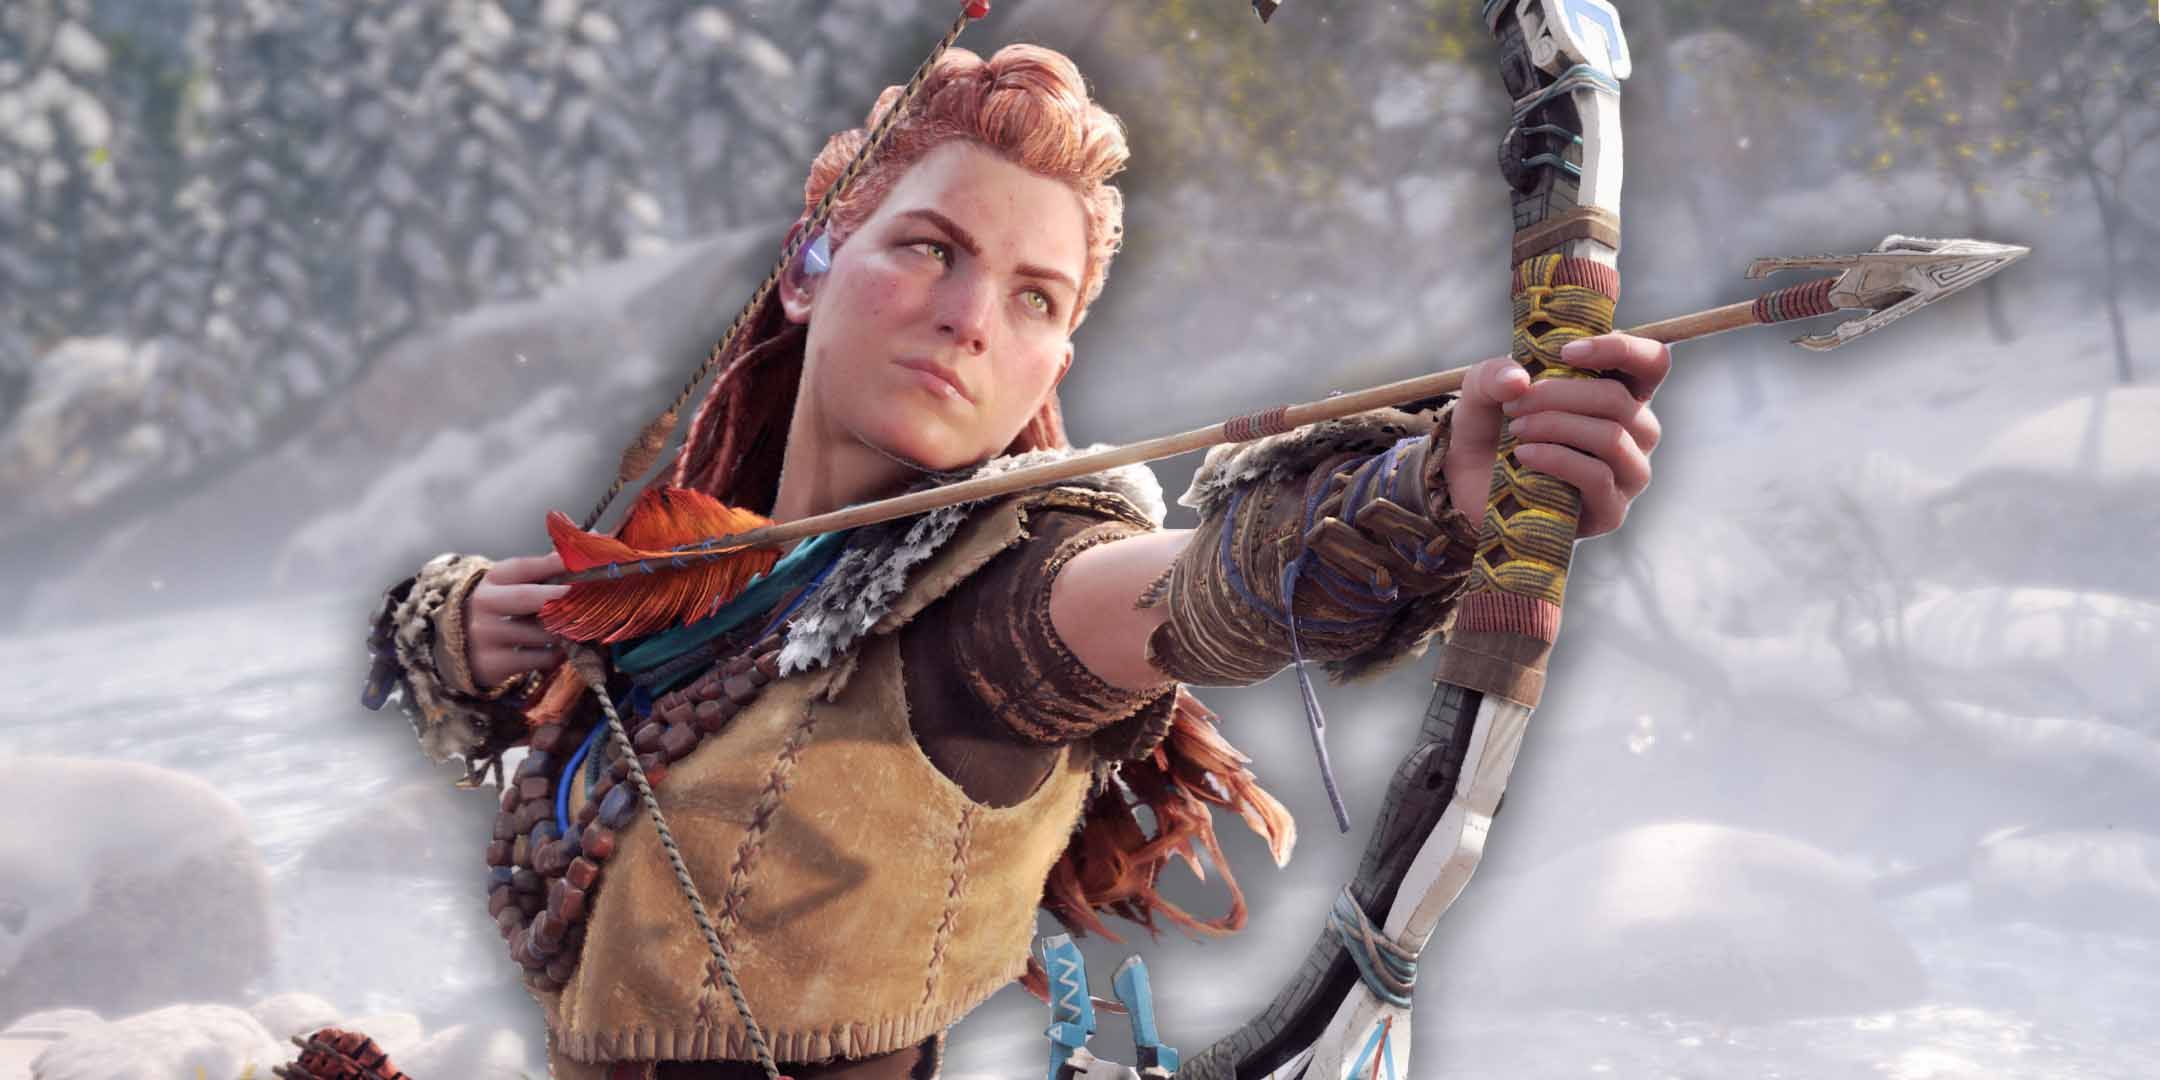 Aloy from Horizon Forbidden West drawing her bow